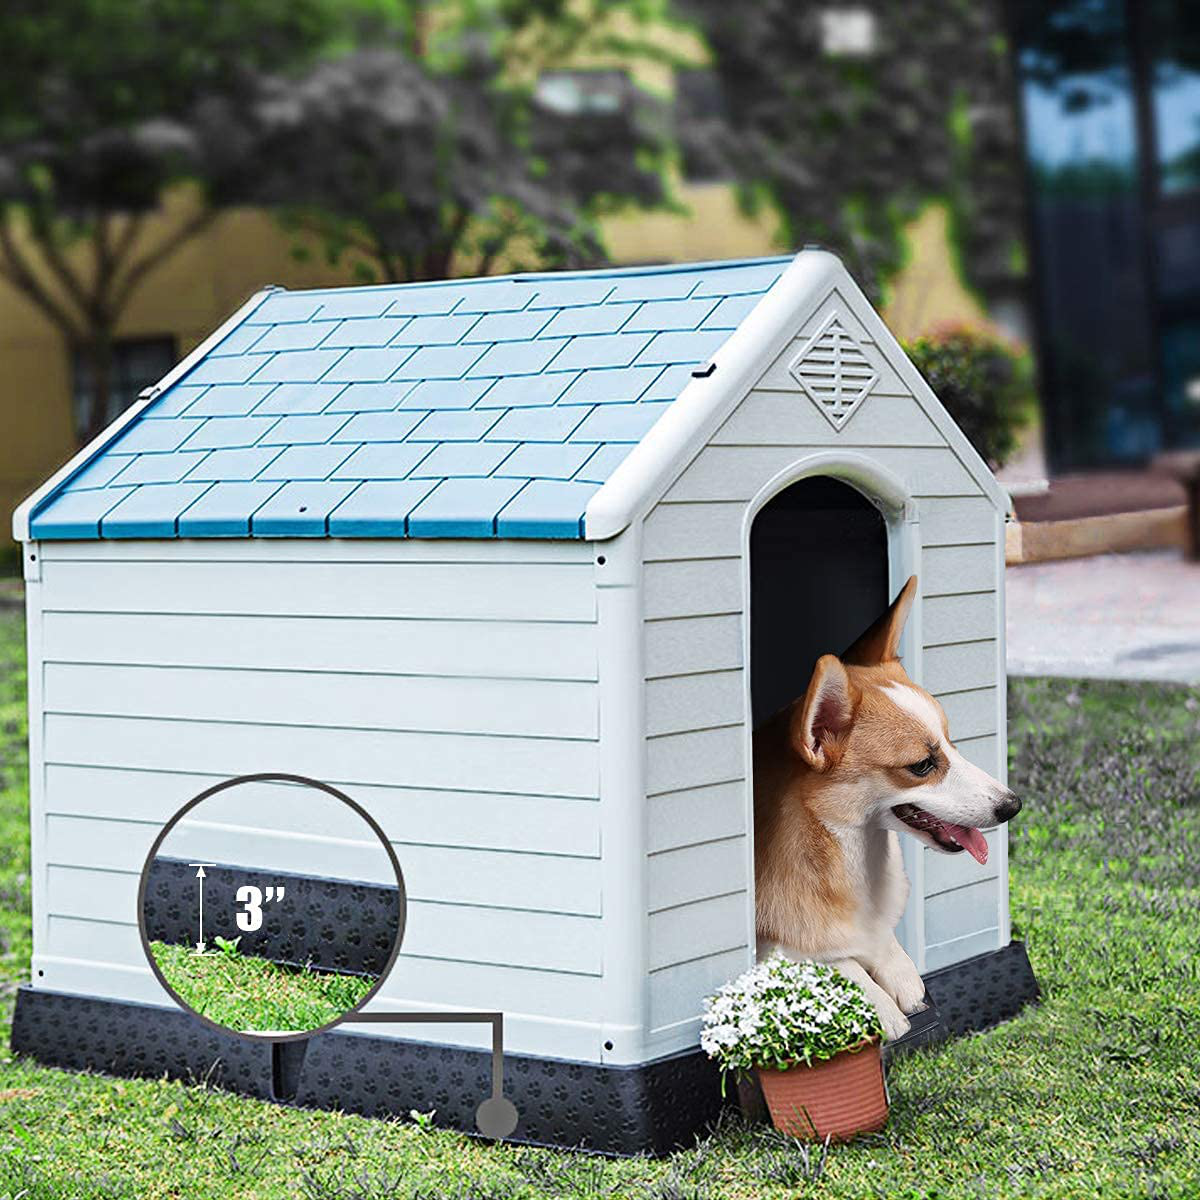 Giantex Dog House for Large Medium Dogs, Waterproof Plastic Dog Houses with Air Vents and Elevated Floor, Easy to Assemble, Outdoor Cat House Feeding Station Indoor Patio Backyard Dog Kennel House